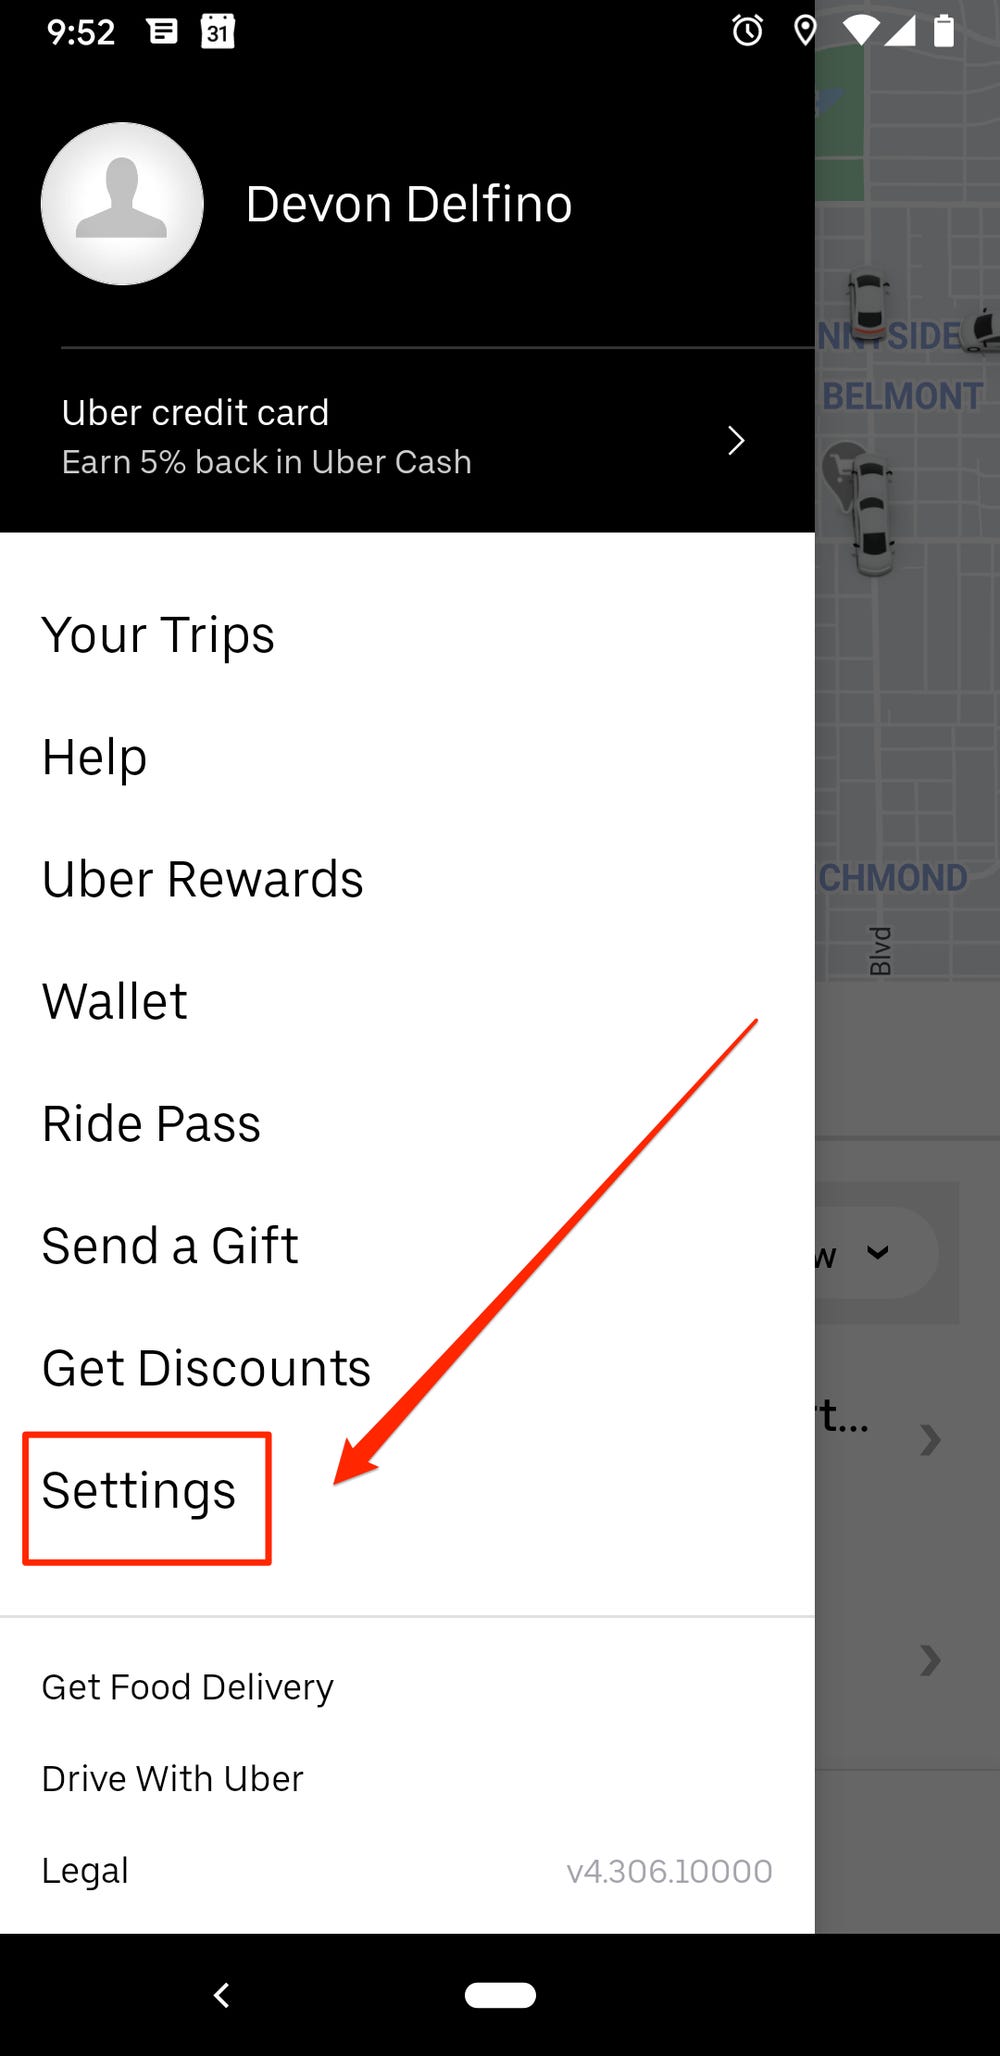 How Do I Change My Uber Account Number?